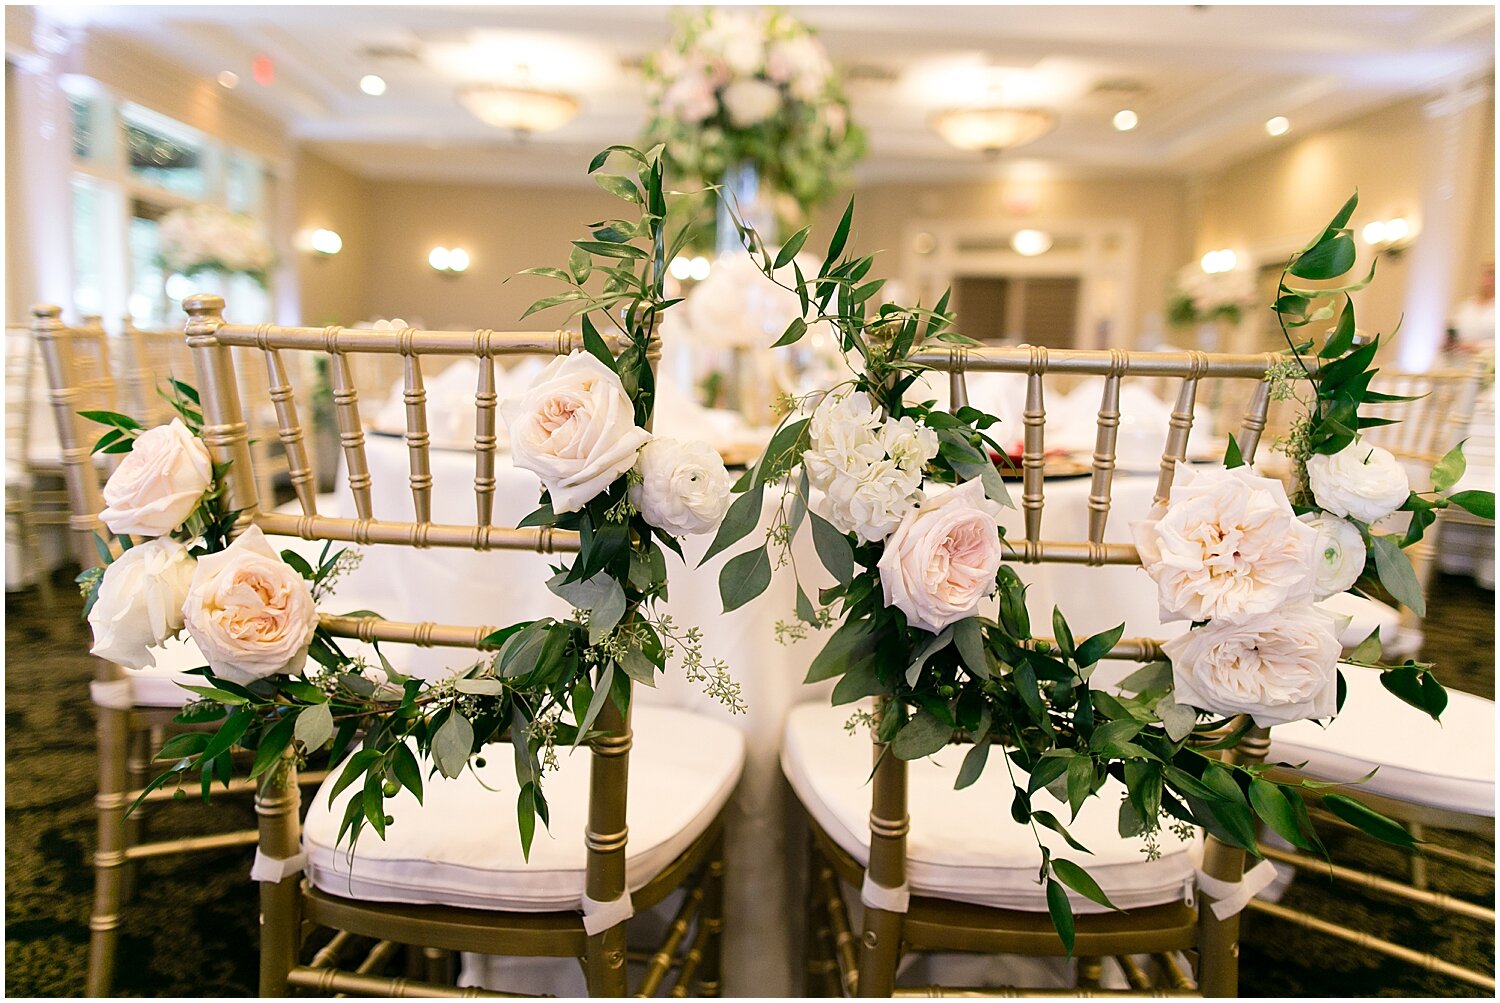  floral decor for bride and grooms chairs 